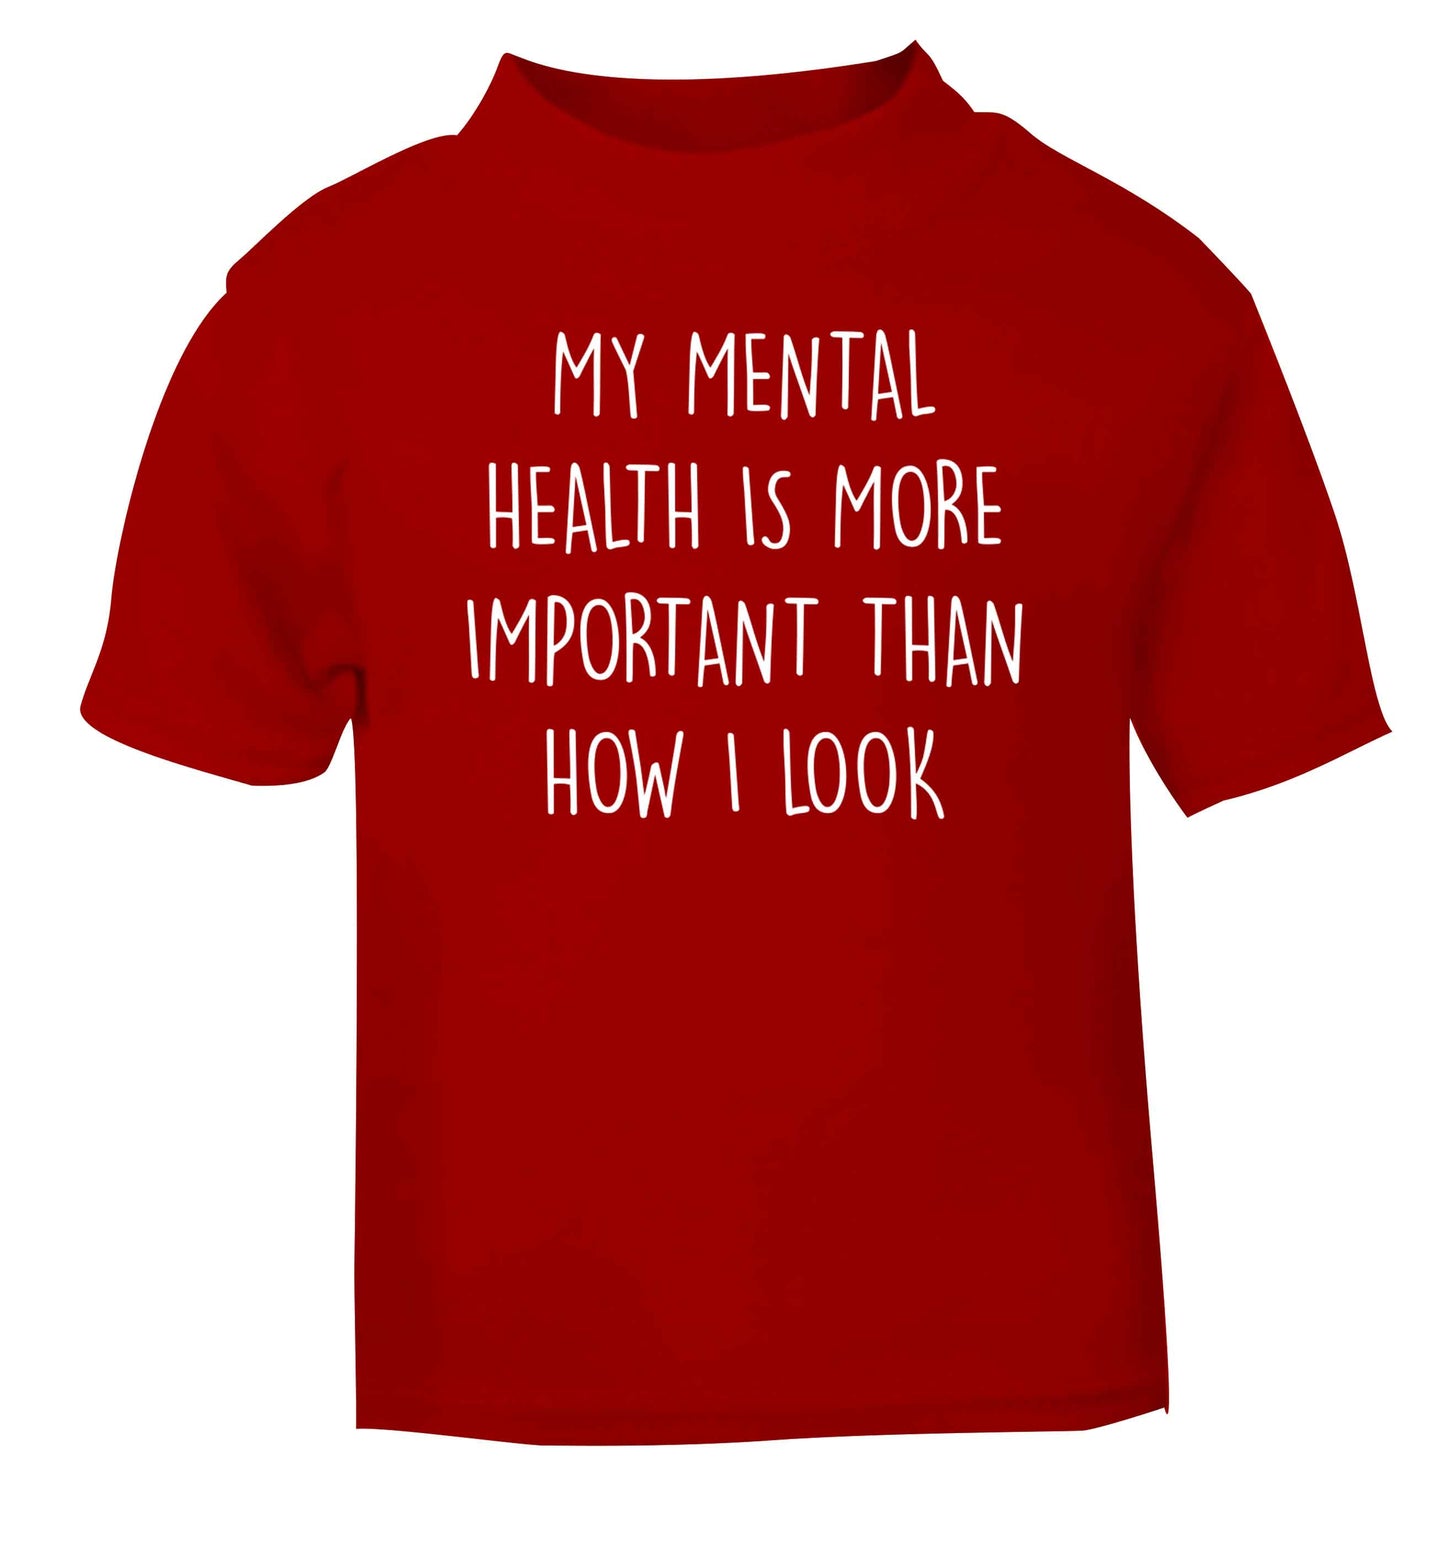 My mental health is more importnat than how I look red baby toddler Tshirt 2 Years